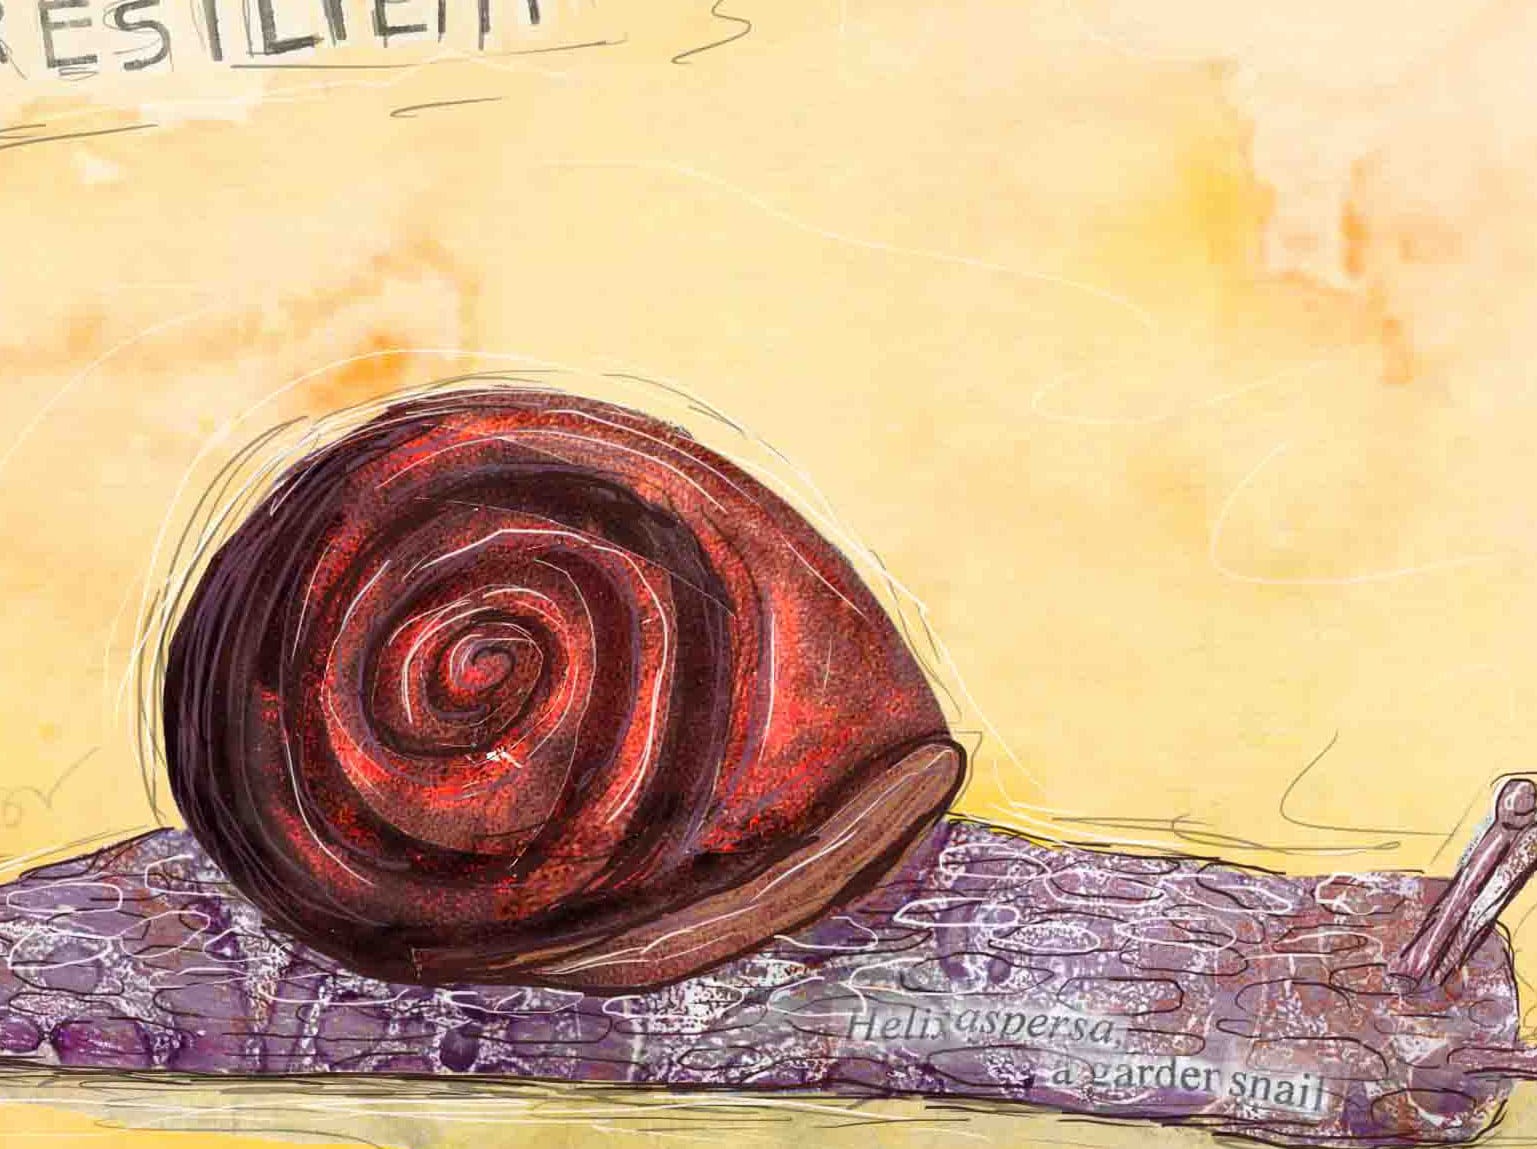 Greeting Card of a Paper Collage of a Snail with the word Resilient and snail facts - Inspirational - Blank Inside